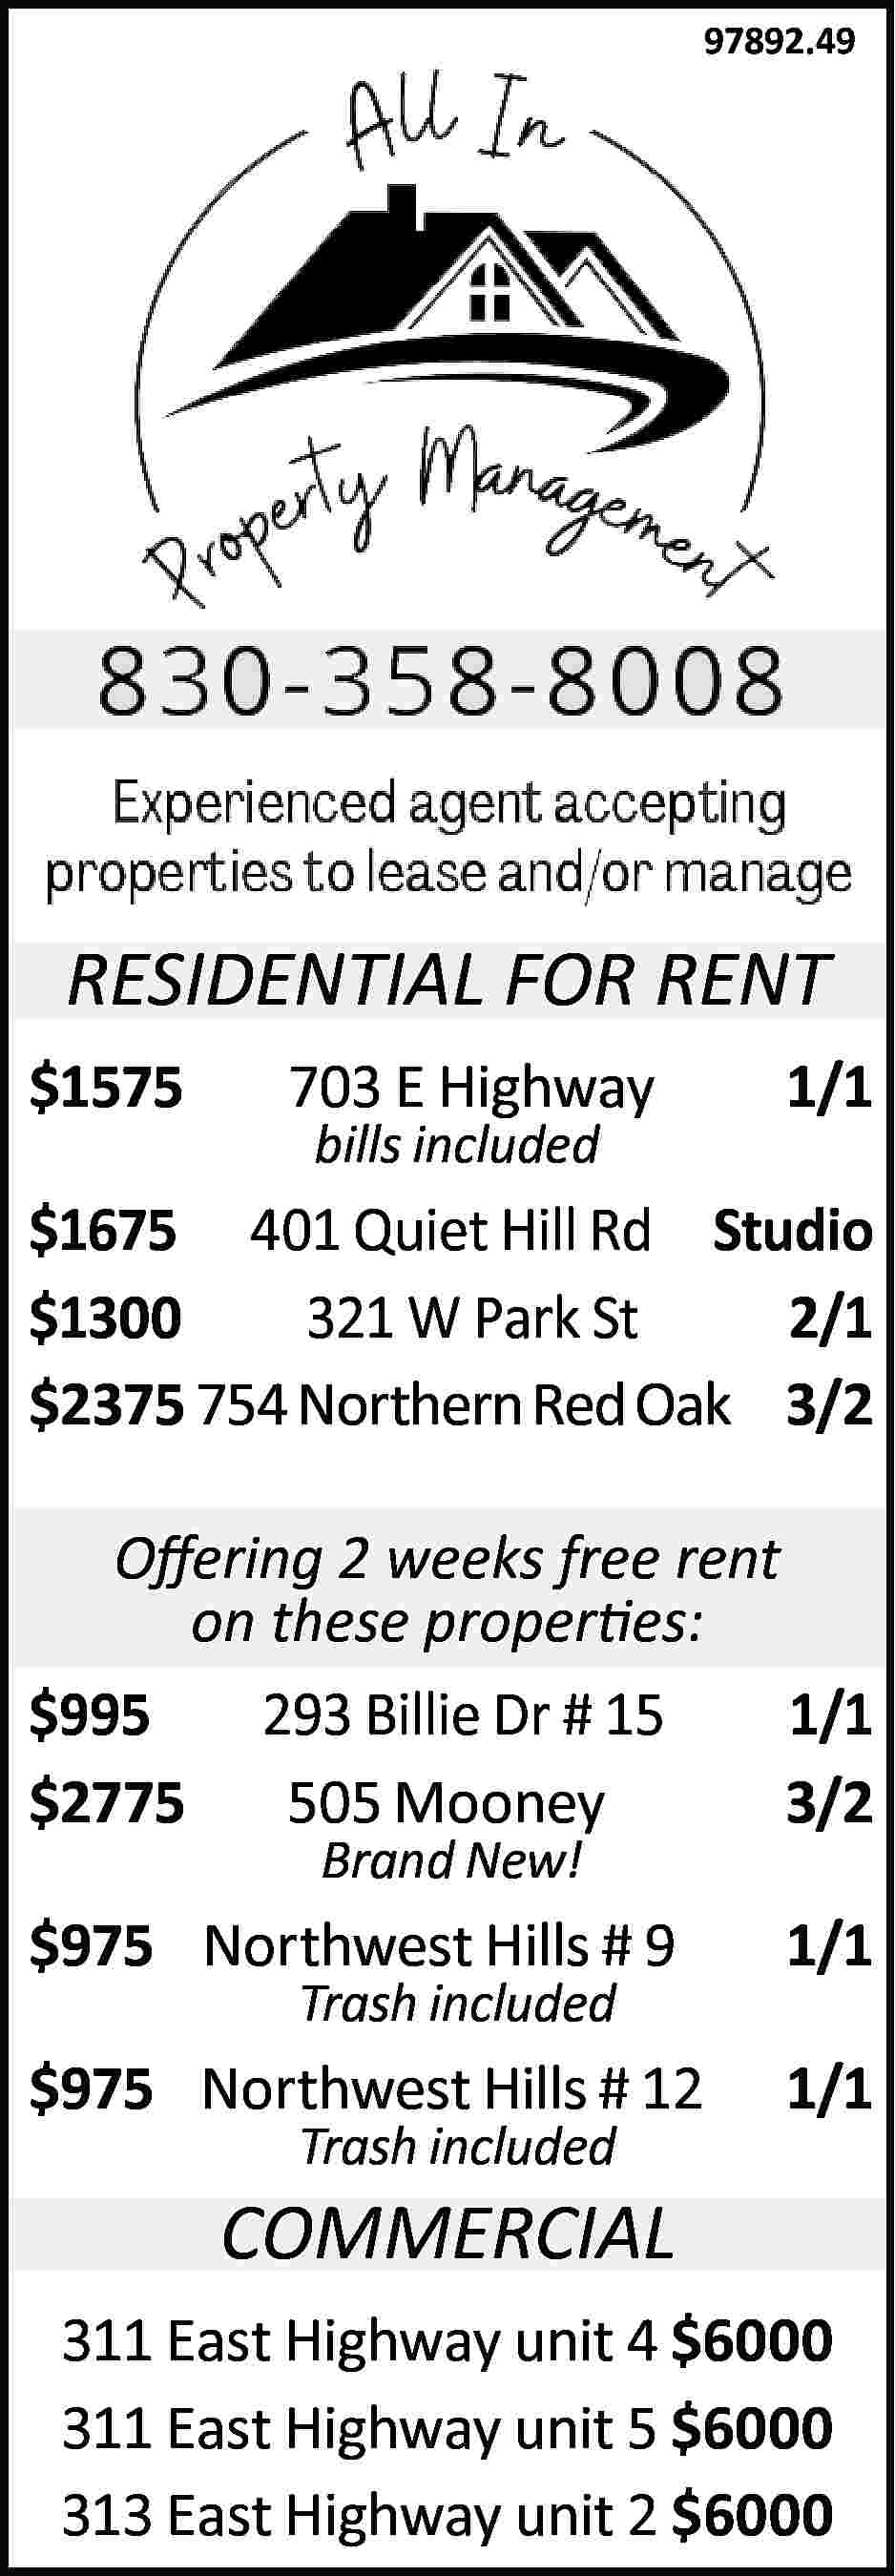 97892.49 RESIDENTIAL FOR RENT $1575  97892.49 RESIDENTIAL FOR RENT $1575 703 E Highway bills included 1/1 $1675 401 Quiet Hill Rd Studio $1300 321 W Park St 2/1 $2375 754 Northern Red Oak 3/2 Offering 2 weeks free rent on these properties: $995 293 Billie Dr # 15 1/1 $2775 505 Mooney 3/2 Brand New! $975 Northwest Hills # 9 1/1 $975 Northwest Hills # 12 1/1 Trash included Trash included COMMERCIAL 311 East Highway unit 4 $6000 311 East Highway unit 5 $6000 313 East Highway unit 2 $6000